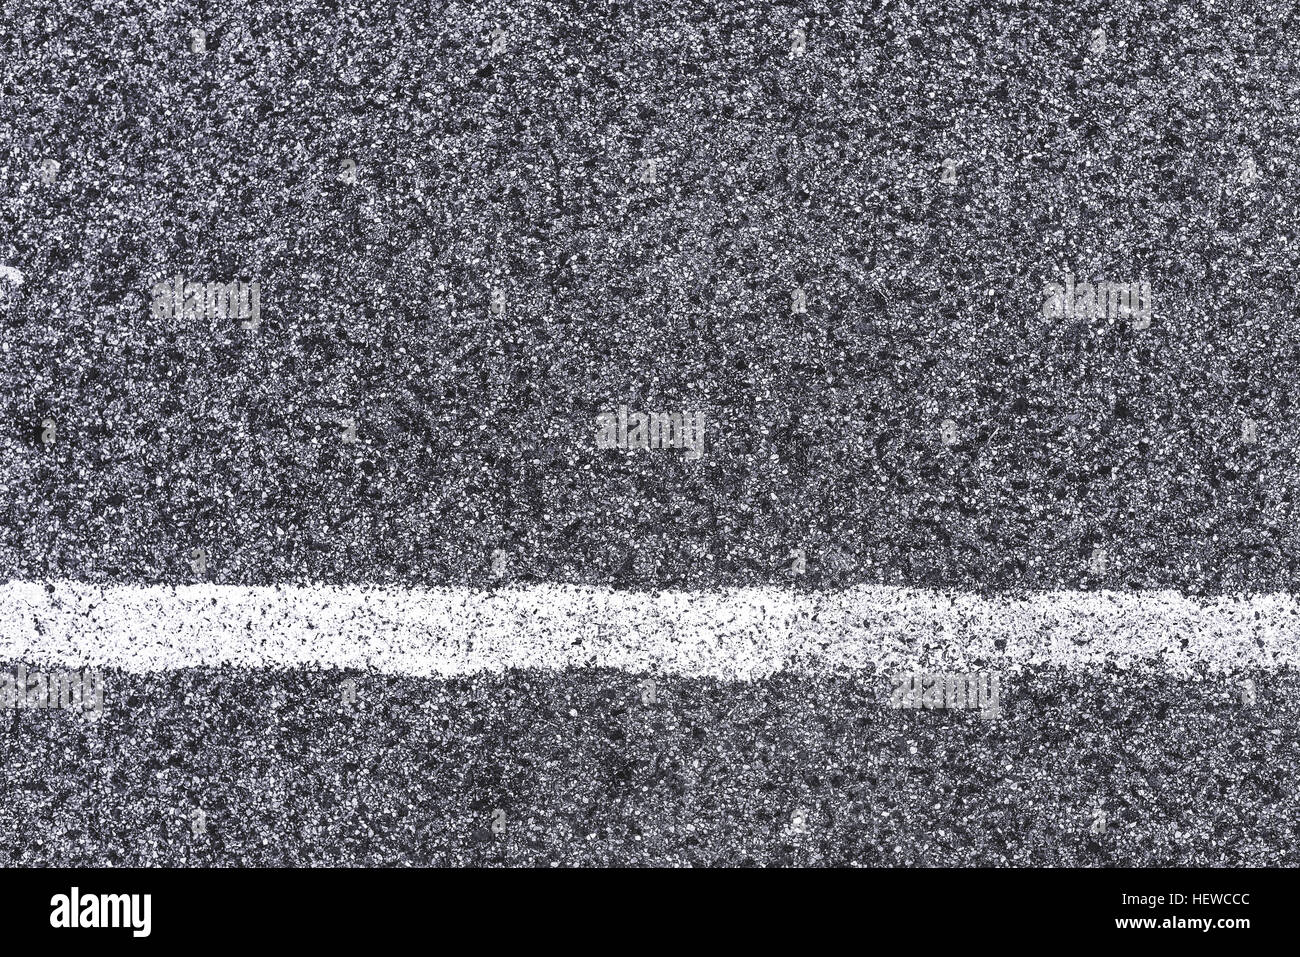 White line and asphalt road as simple background pattern, urban surface texture to be used for minimalistic design element Stock Photo